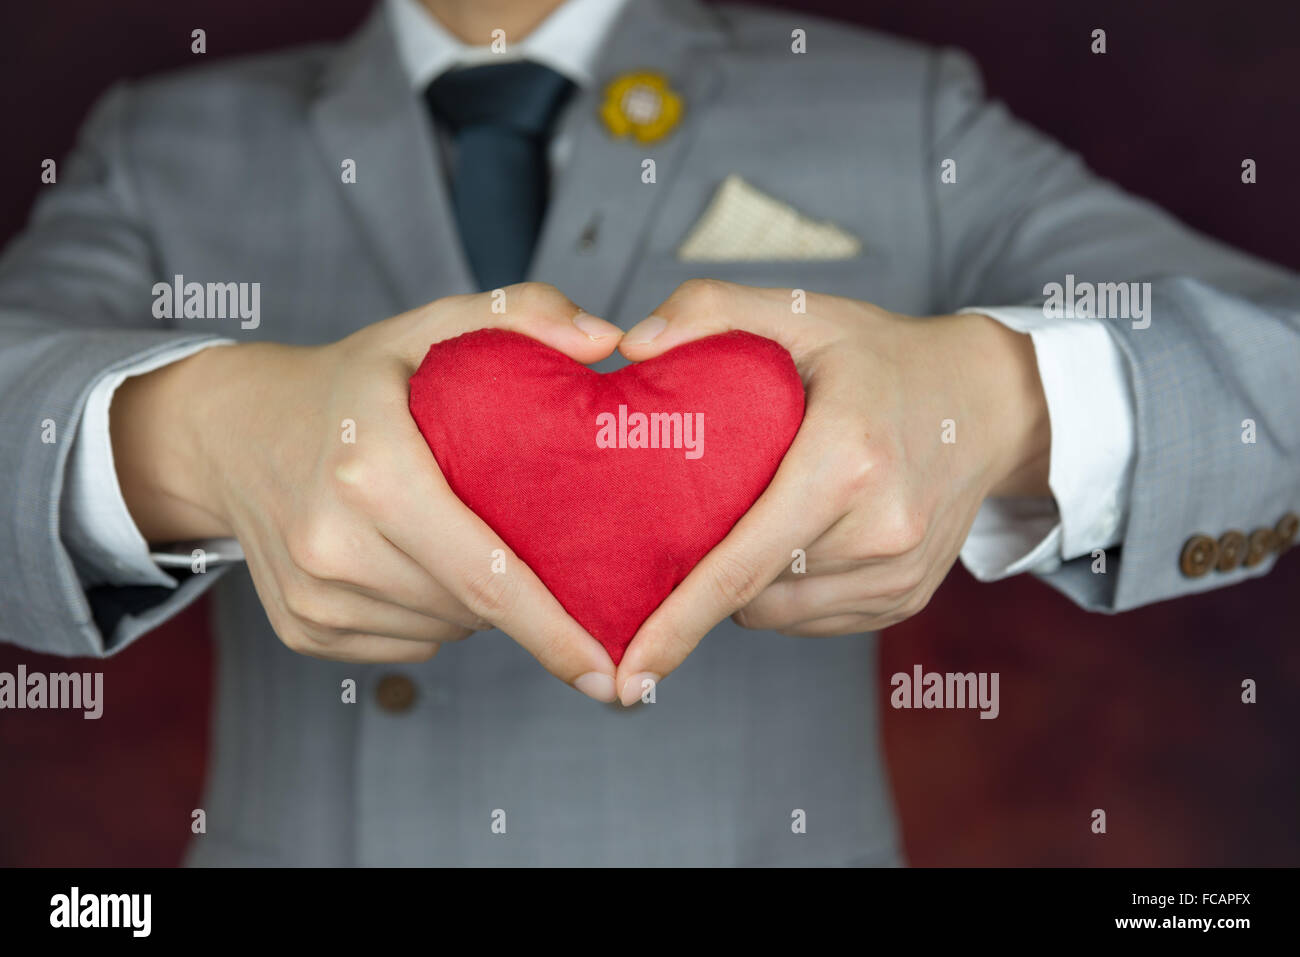 red heart in hands with heart gesture, valentine's concept, man in grey suit Stock Photo